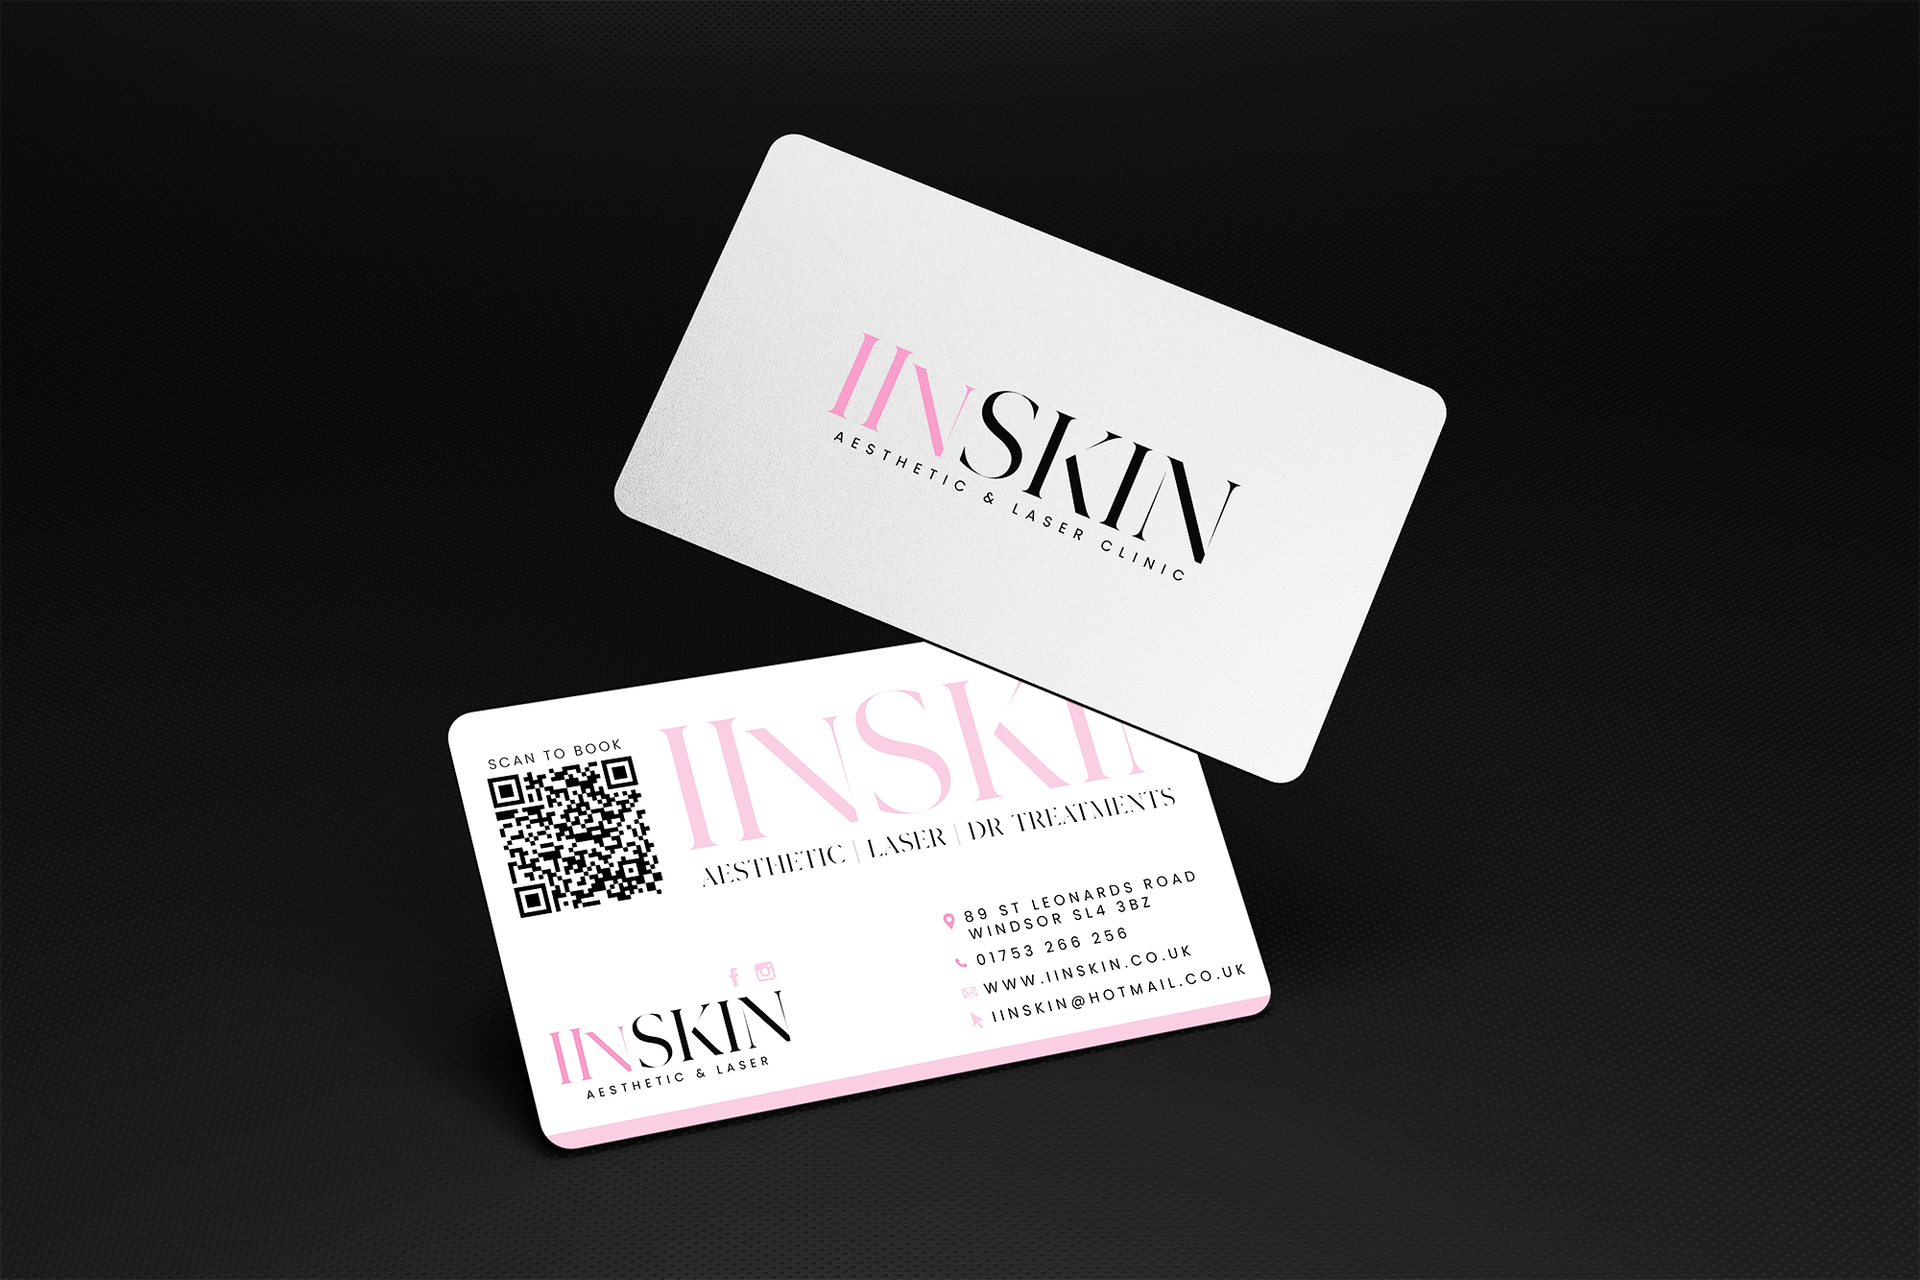 Business card design for iinSkin Clinic Windsor by Web mind